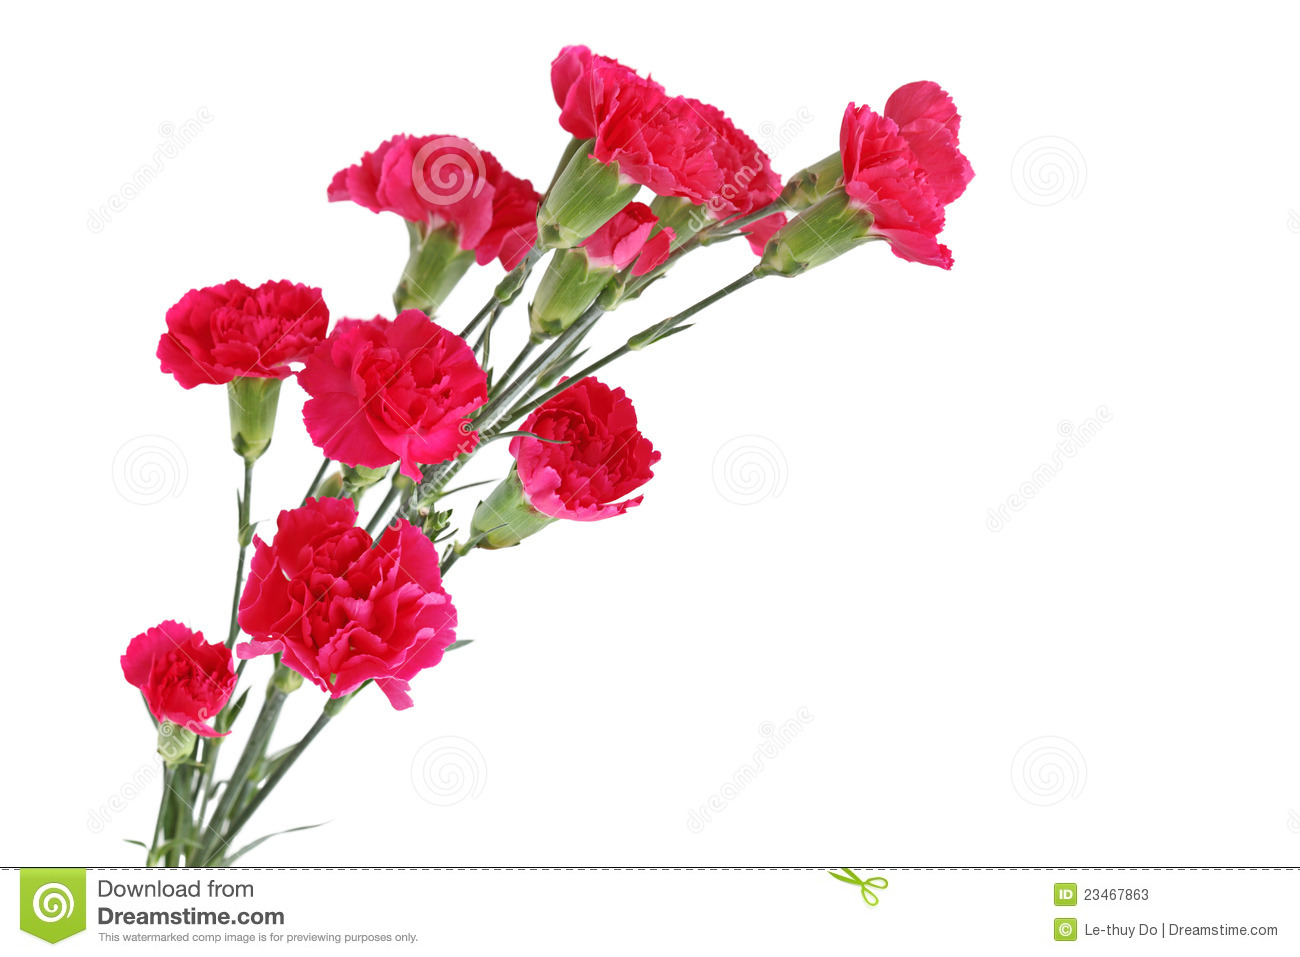 Red Carnation Dianthus Caryophyllus Flowers Isolated On White